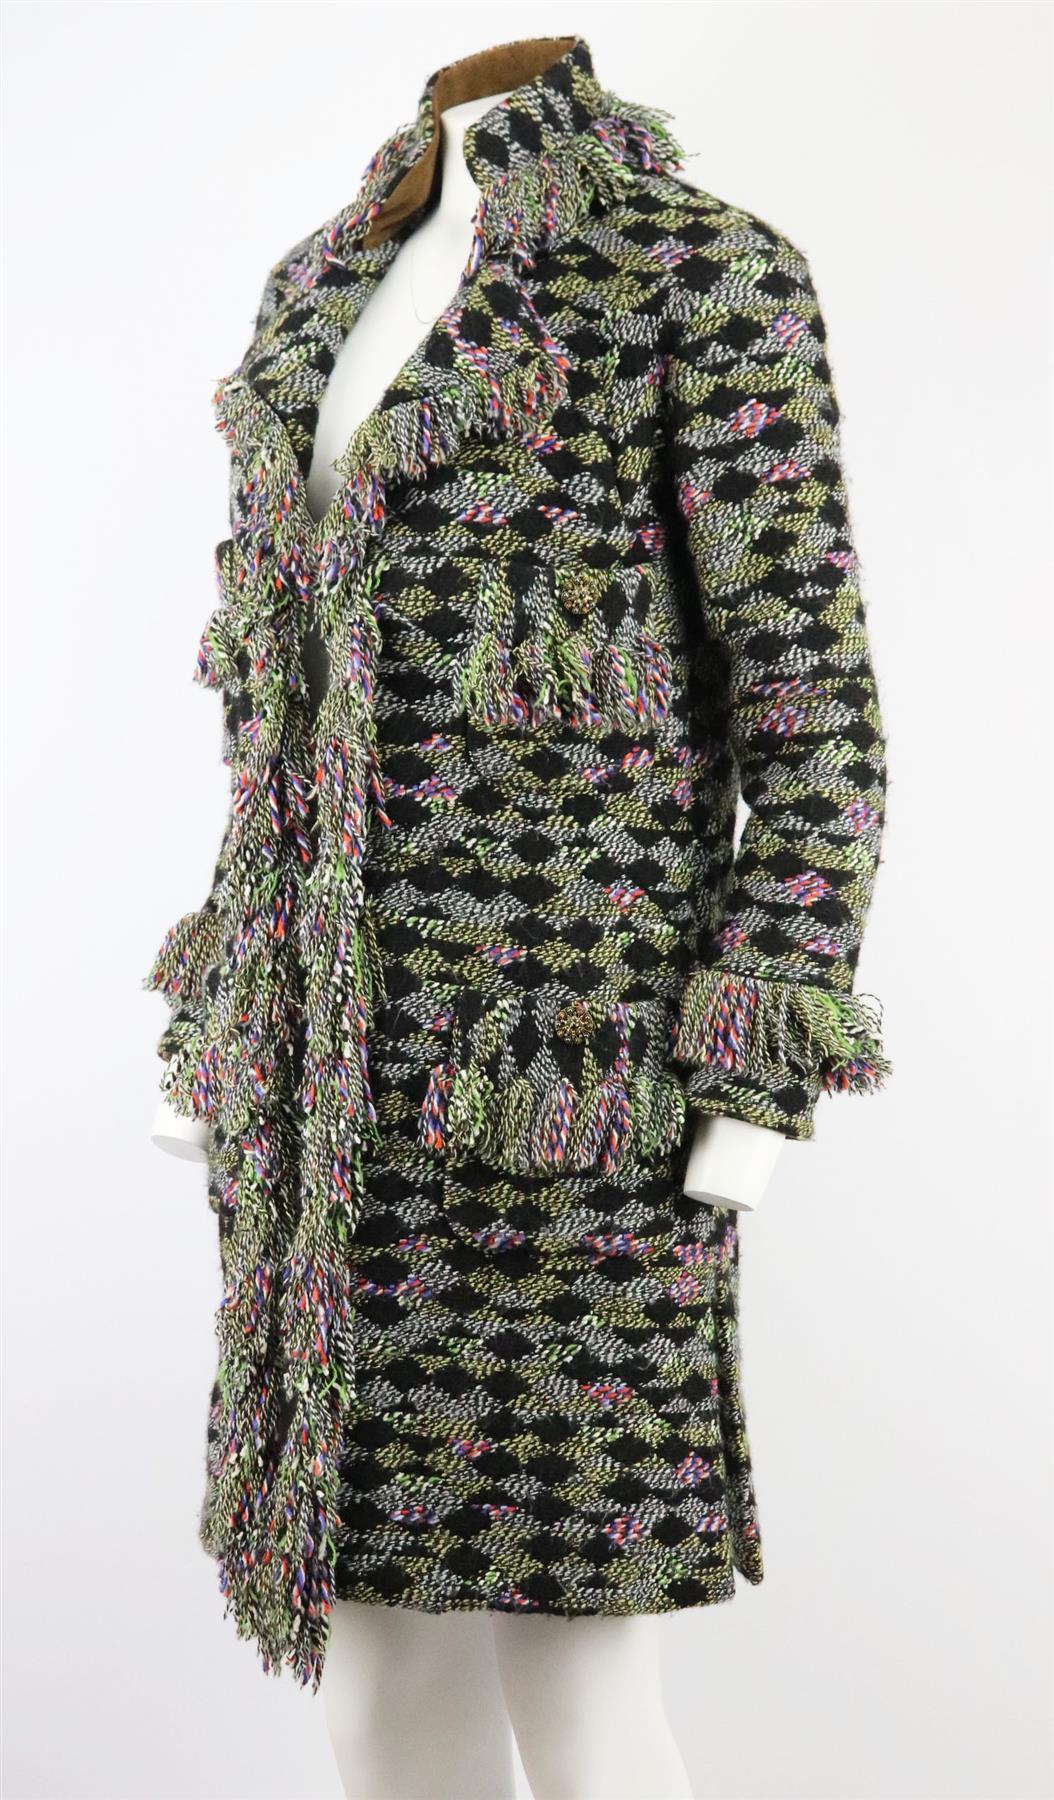 This coat by Chanel from the Paris-Salzburg 2015 catwalk is an elevated essentials piece for your wardrobe; this coat is cut from beautifully rich wool-blend Fantasy tweed and finished with fringing detail along the cuffs, hem and neckline.